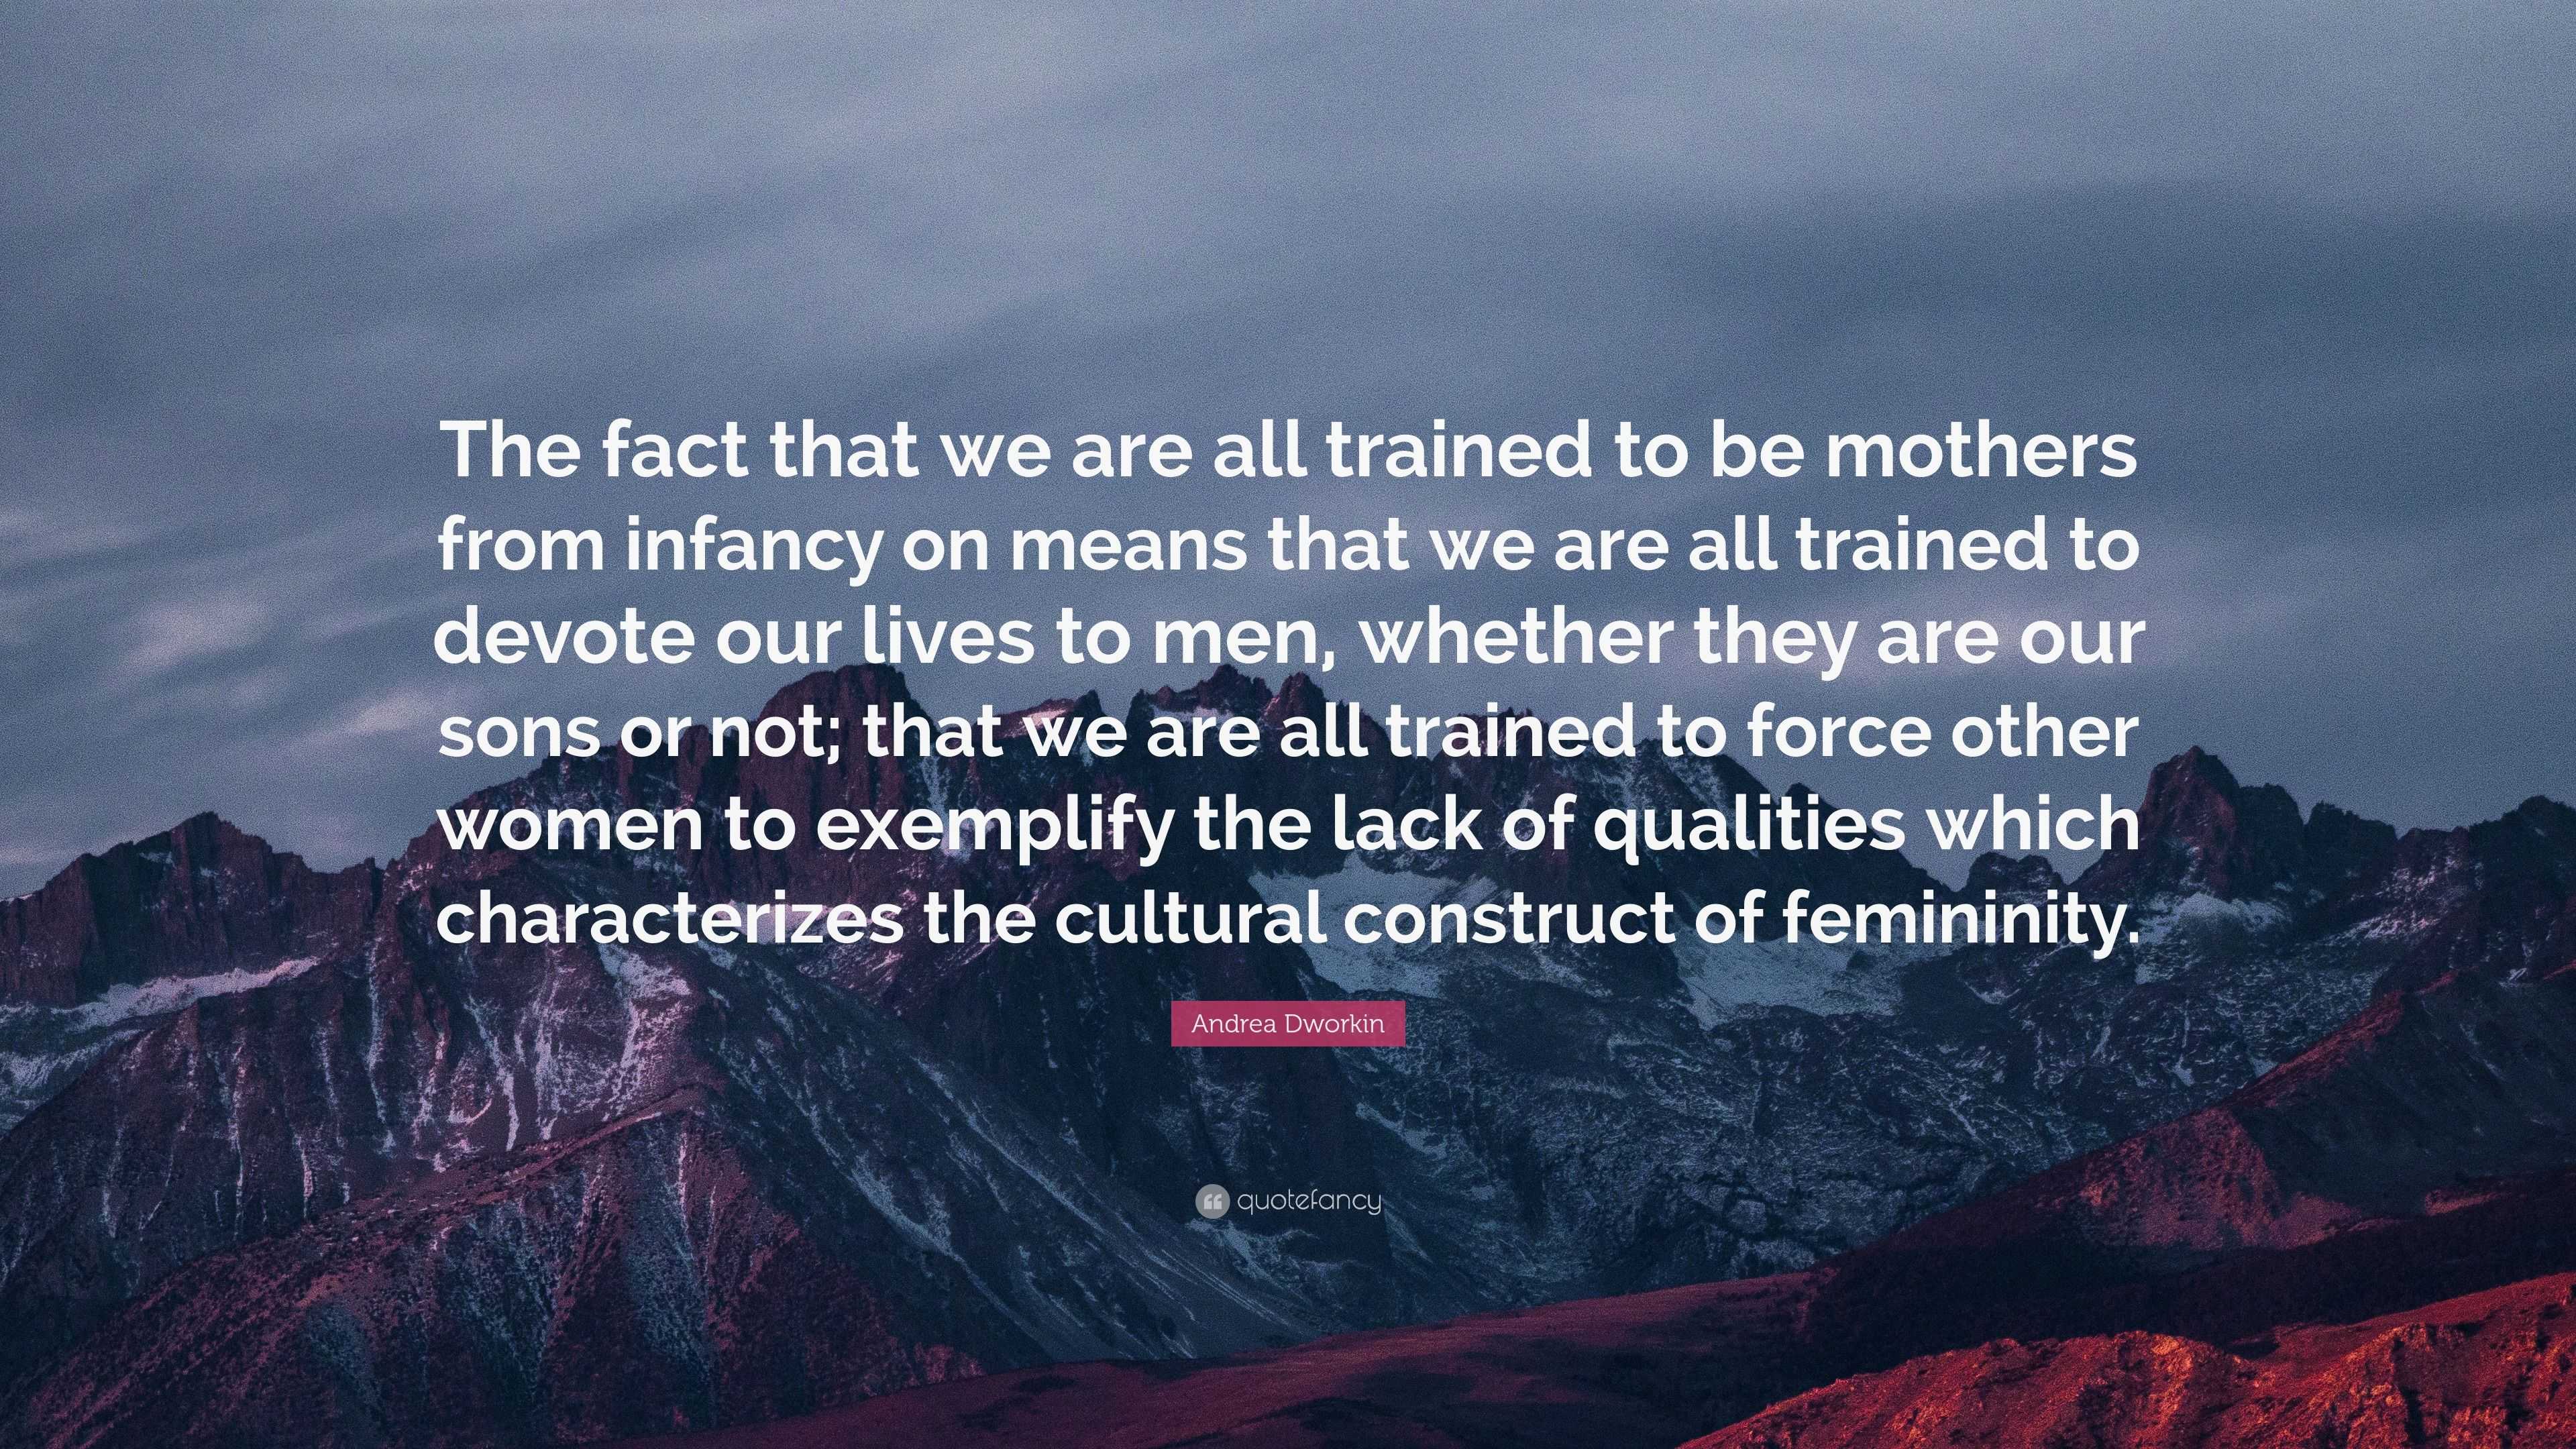 Andrea Dworkin Quote: “The fact that we are all trained to be